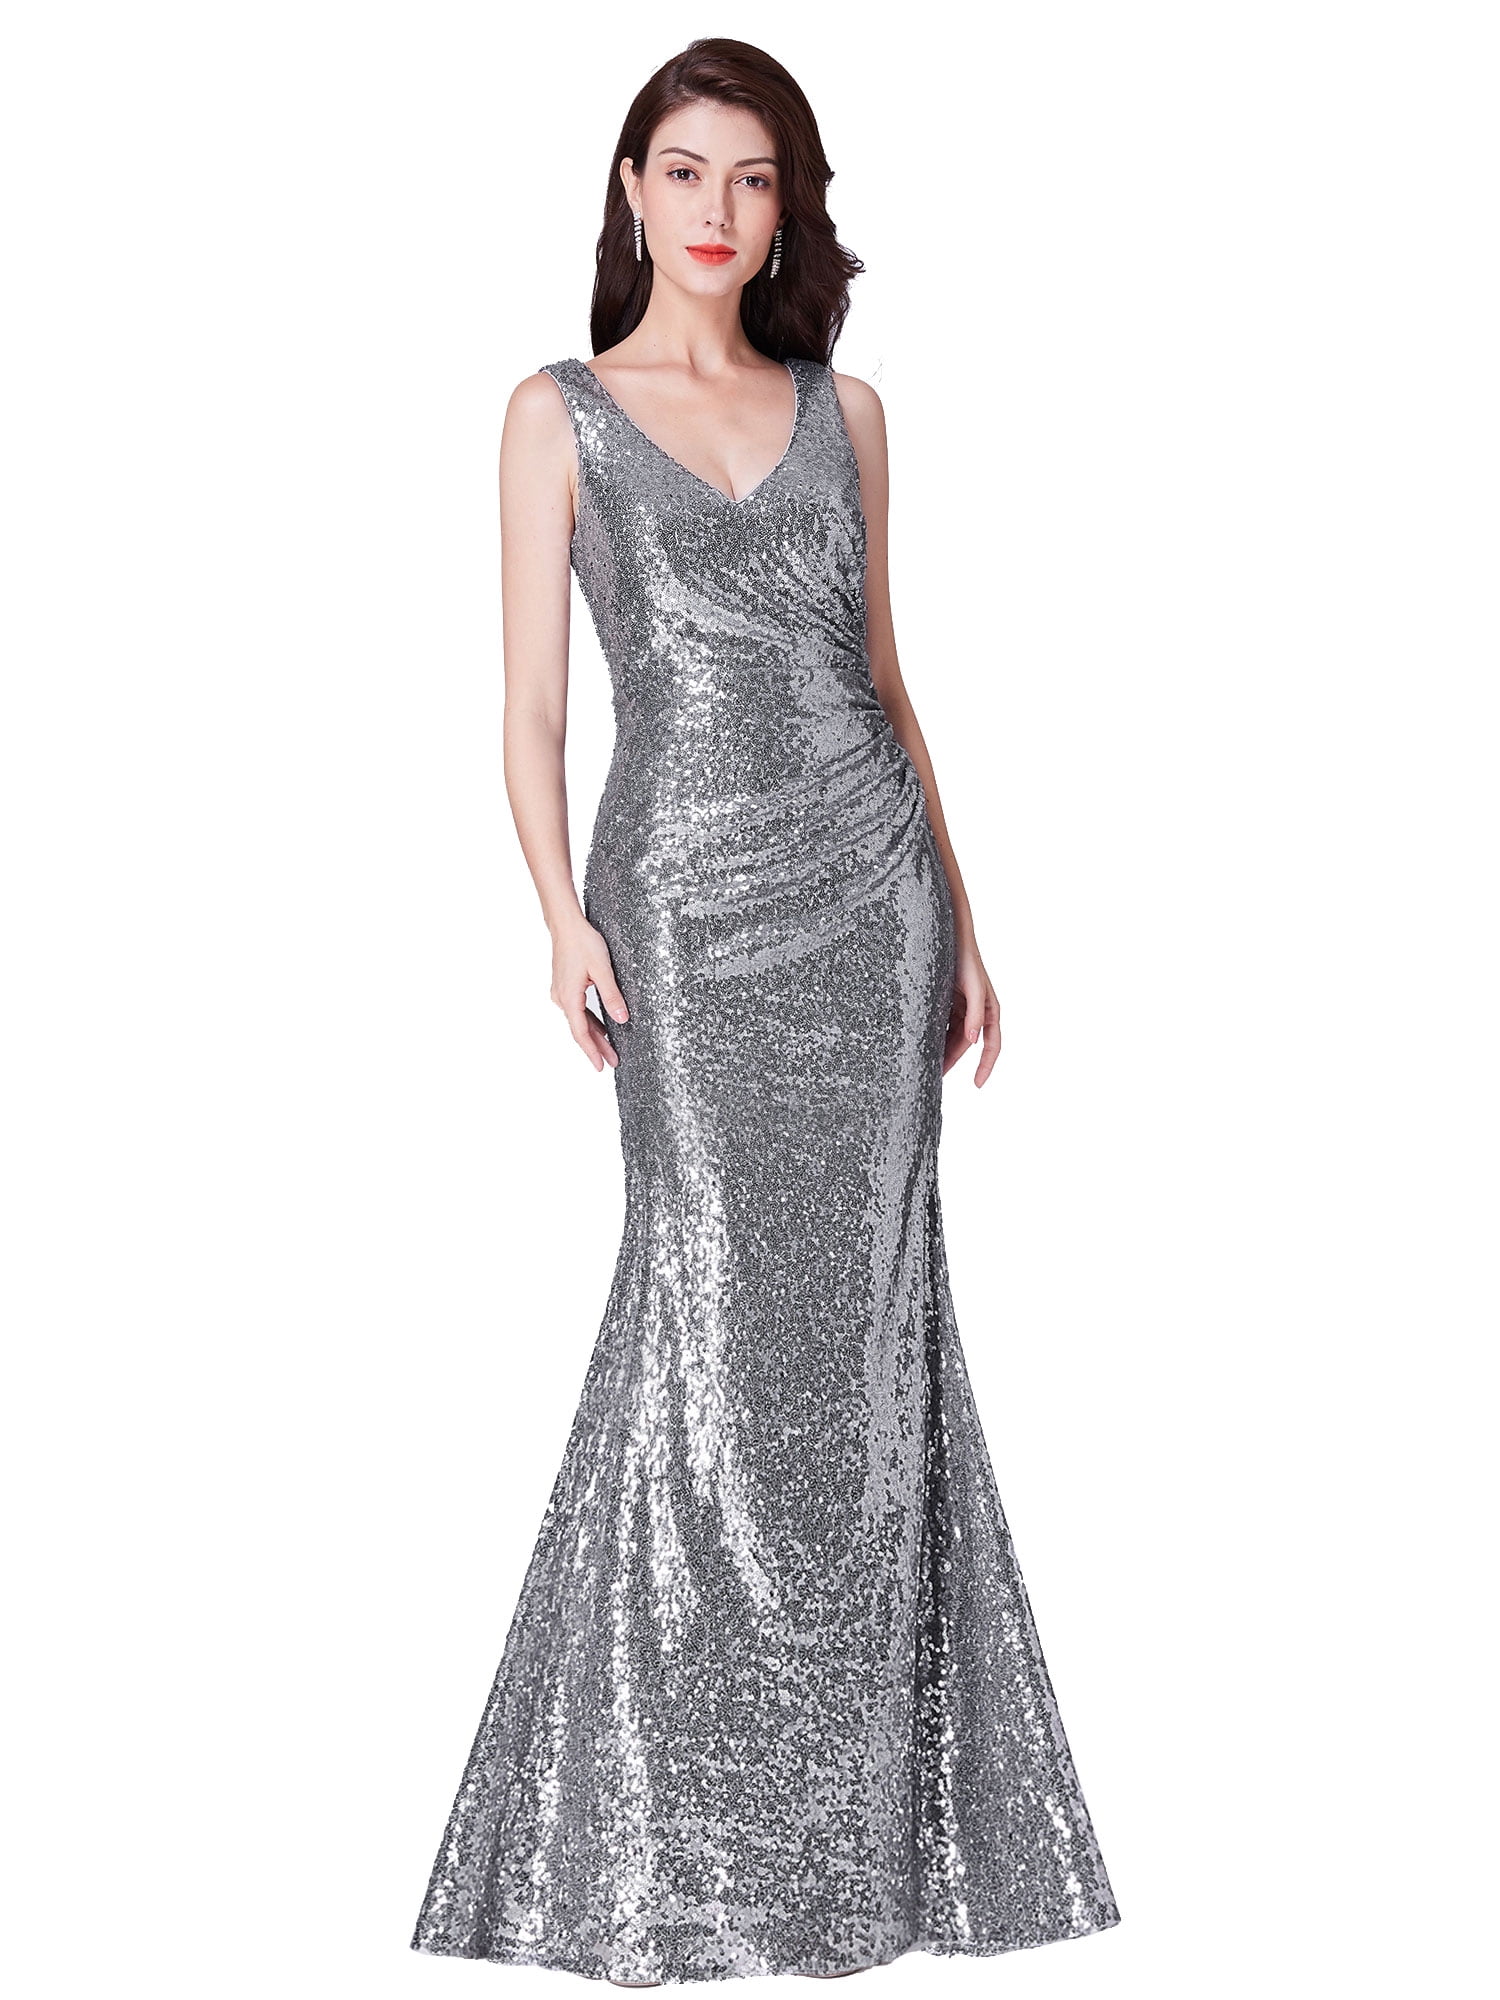 Ever-pretty US Formal Black Evening Dresses Sequins Mermaid Cocktail Party Dress